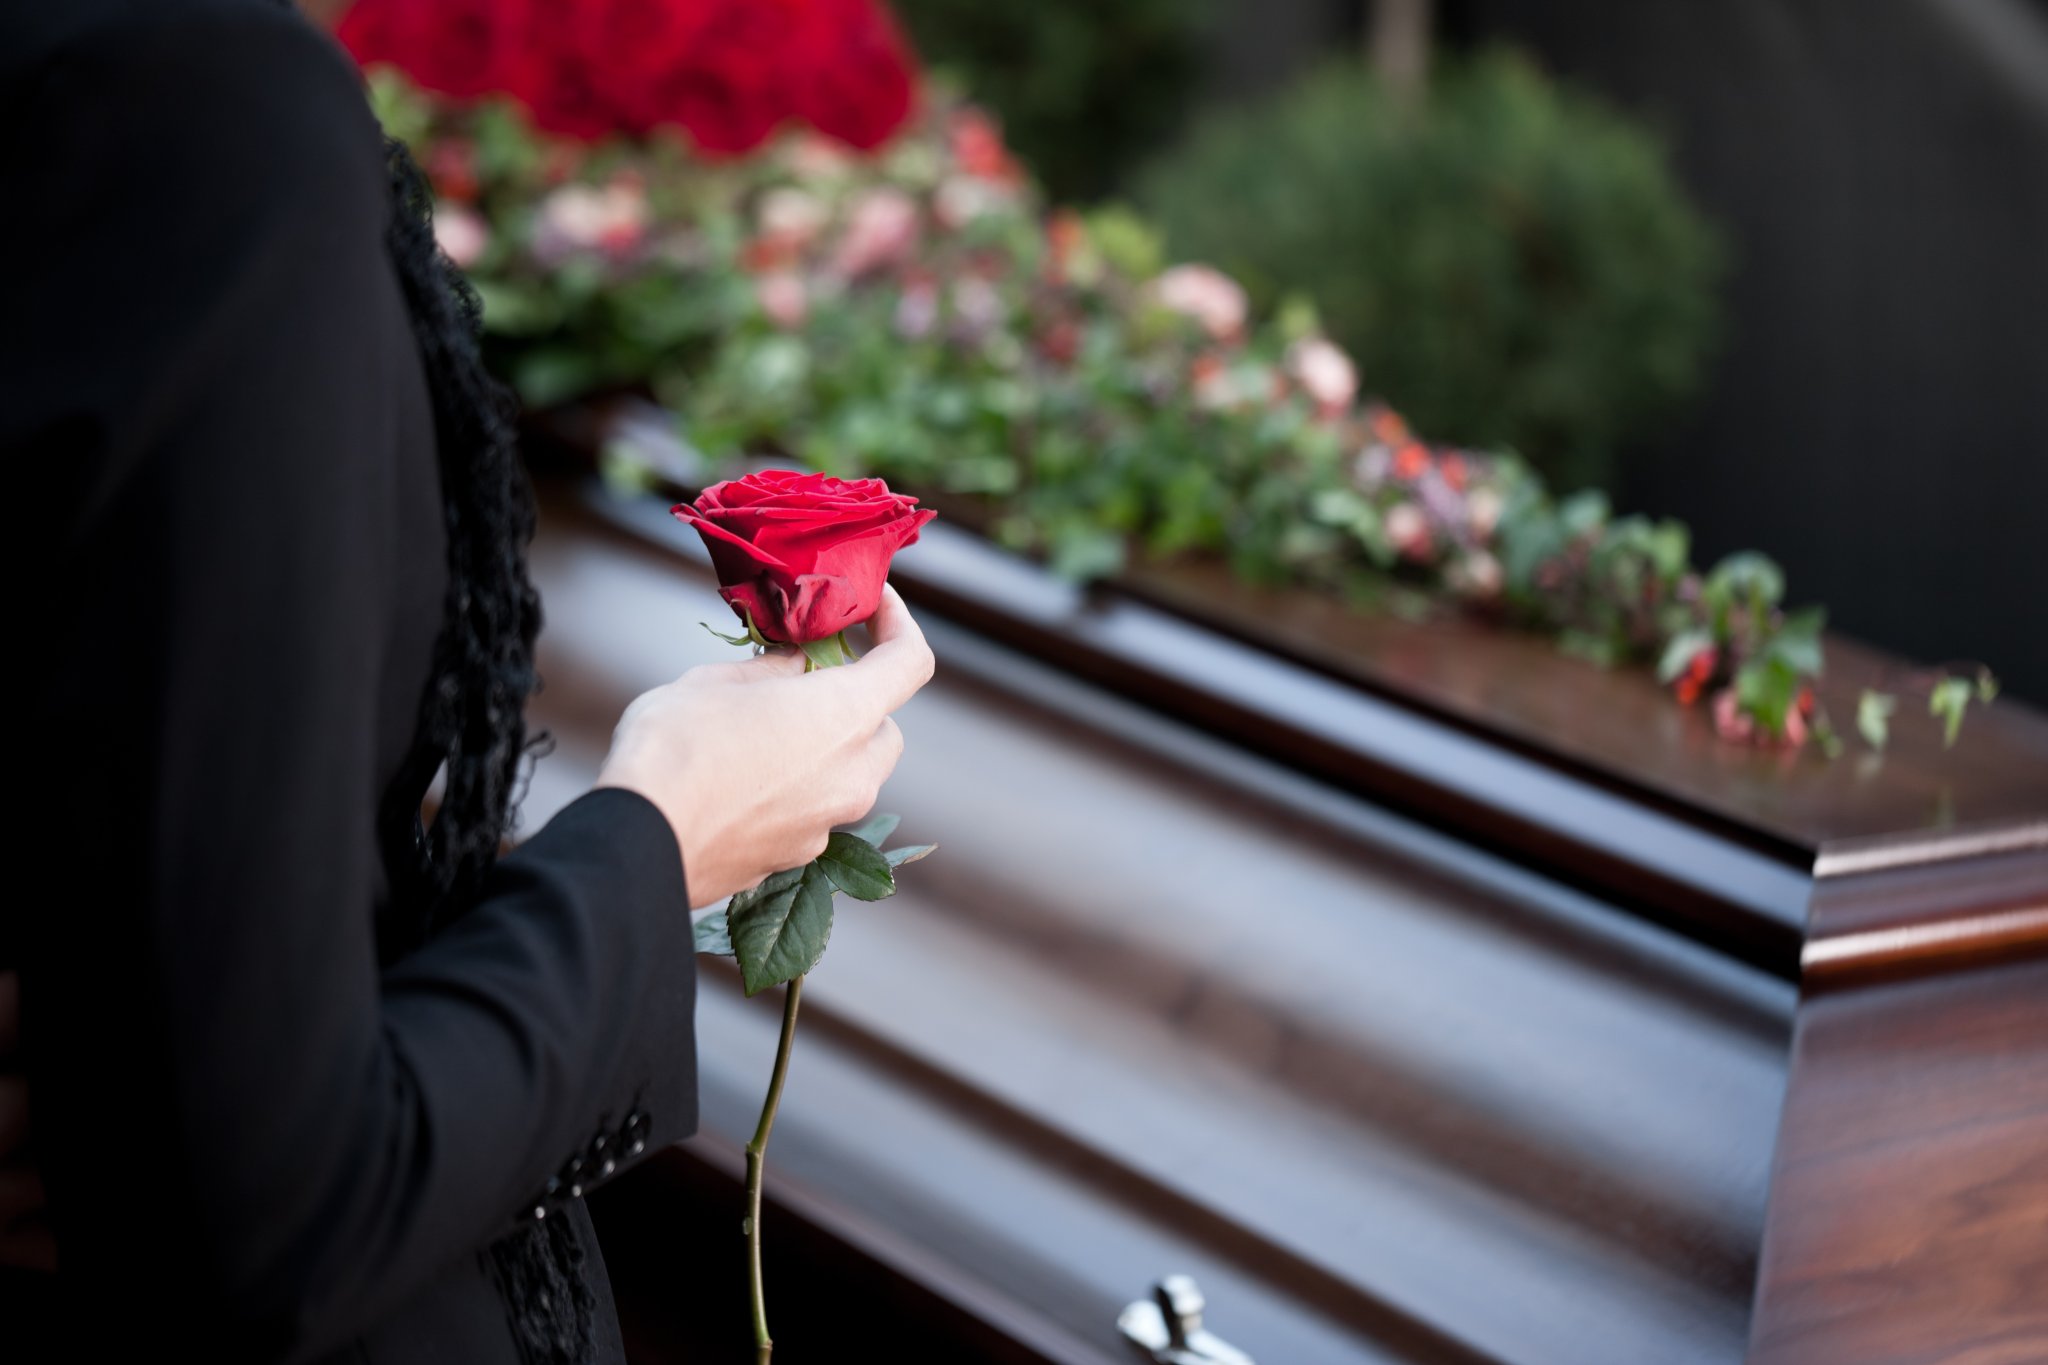 How long will a wrongful death lawsuit take?